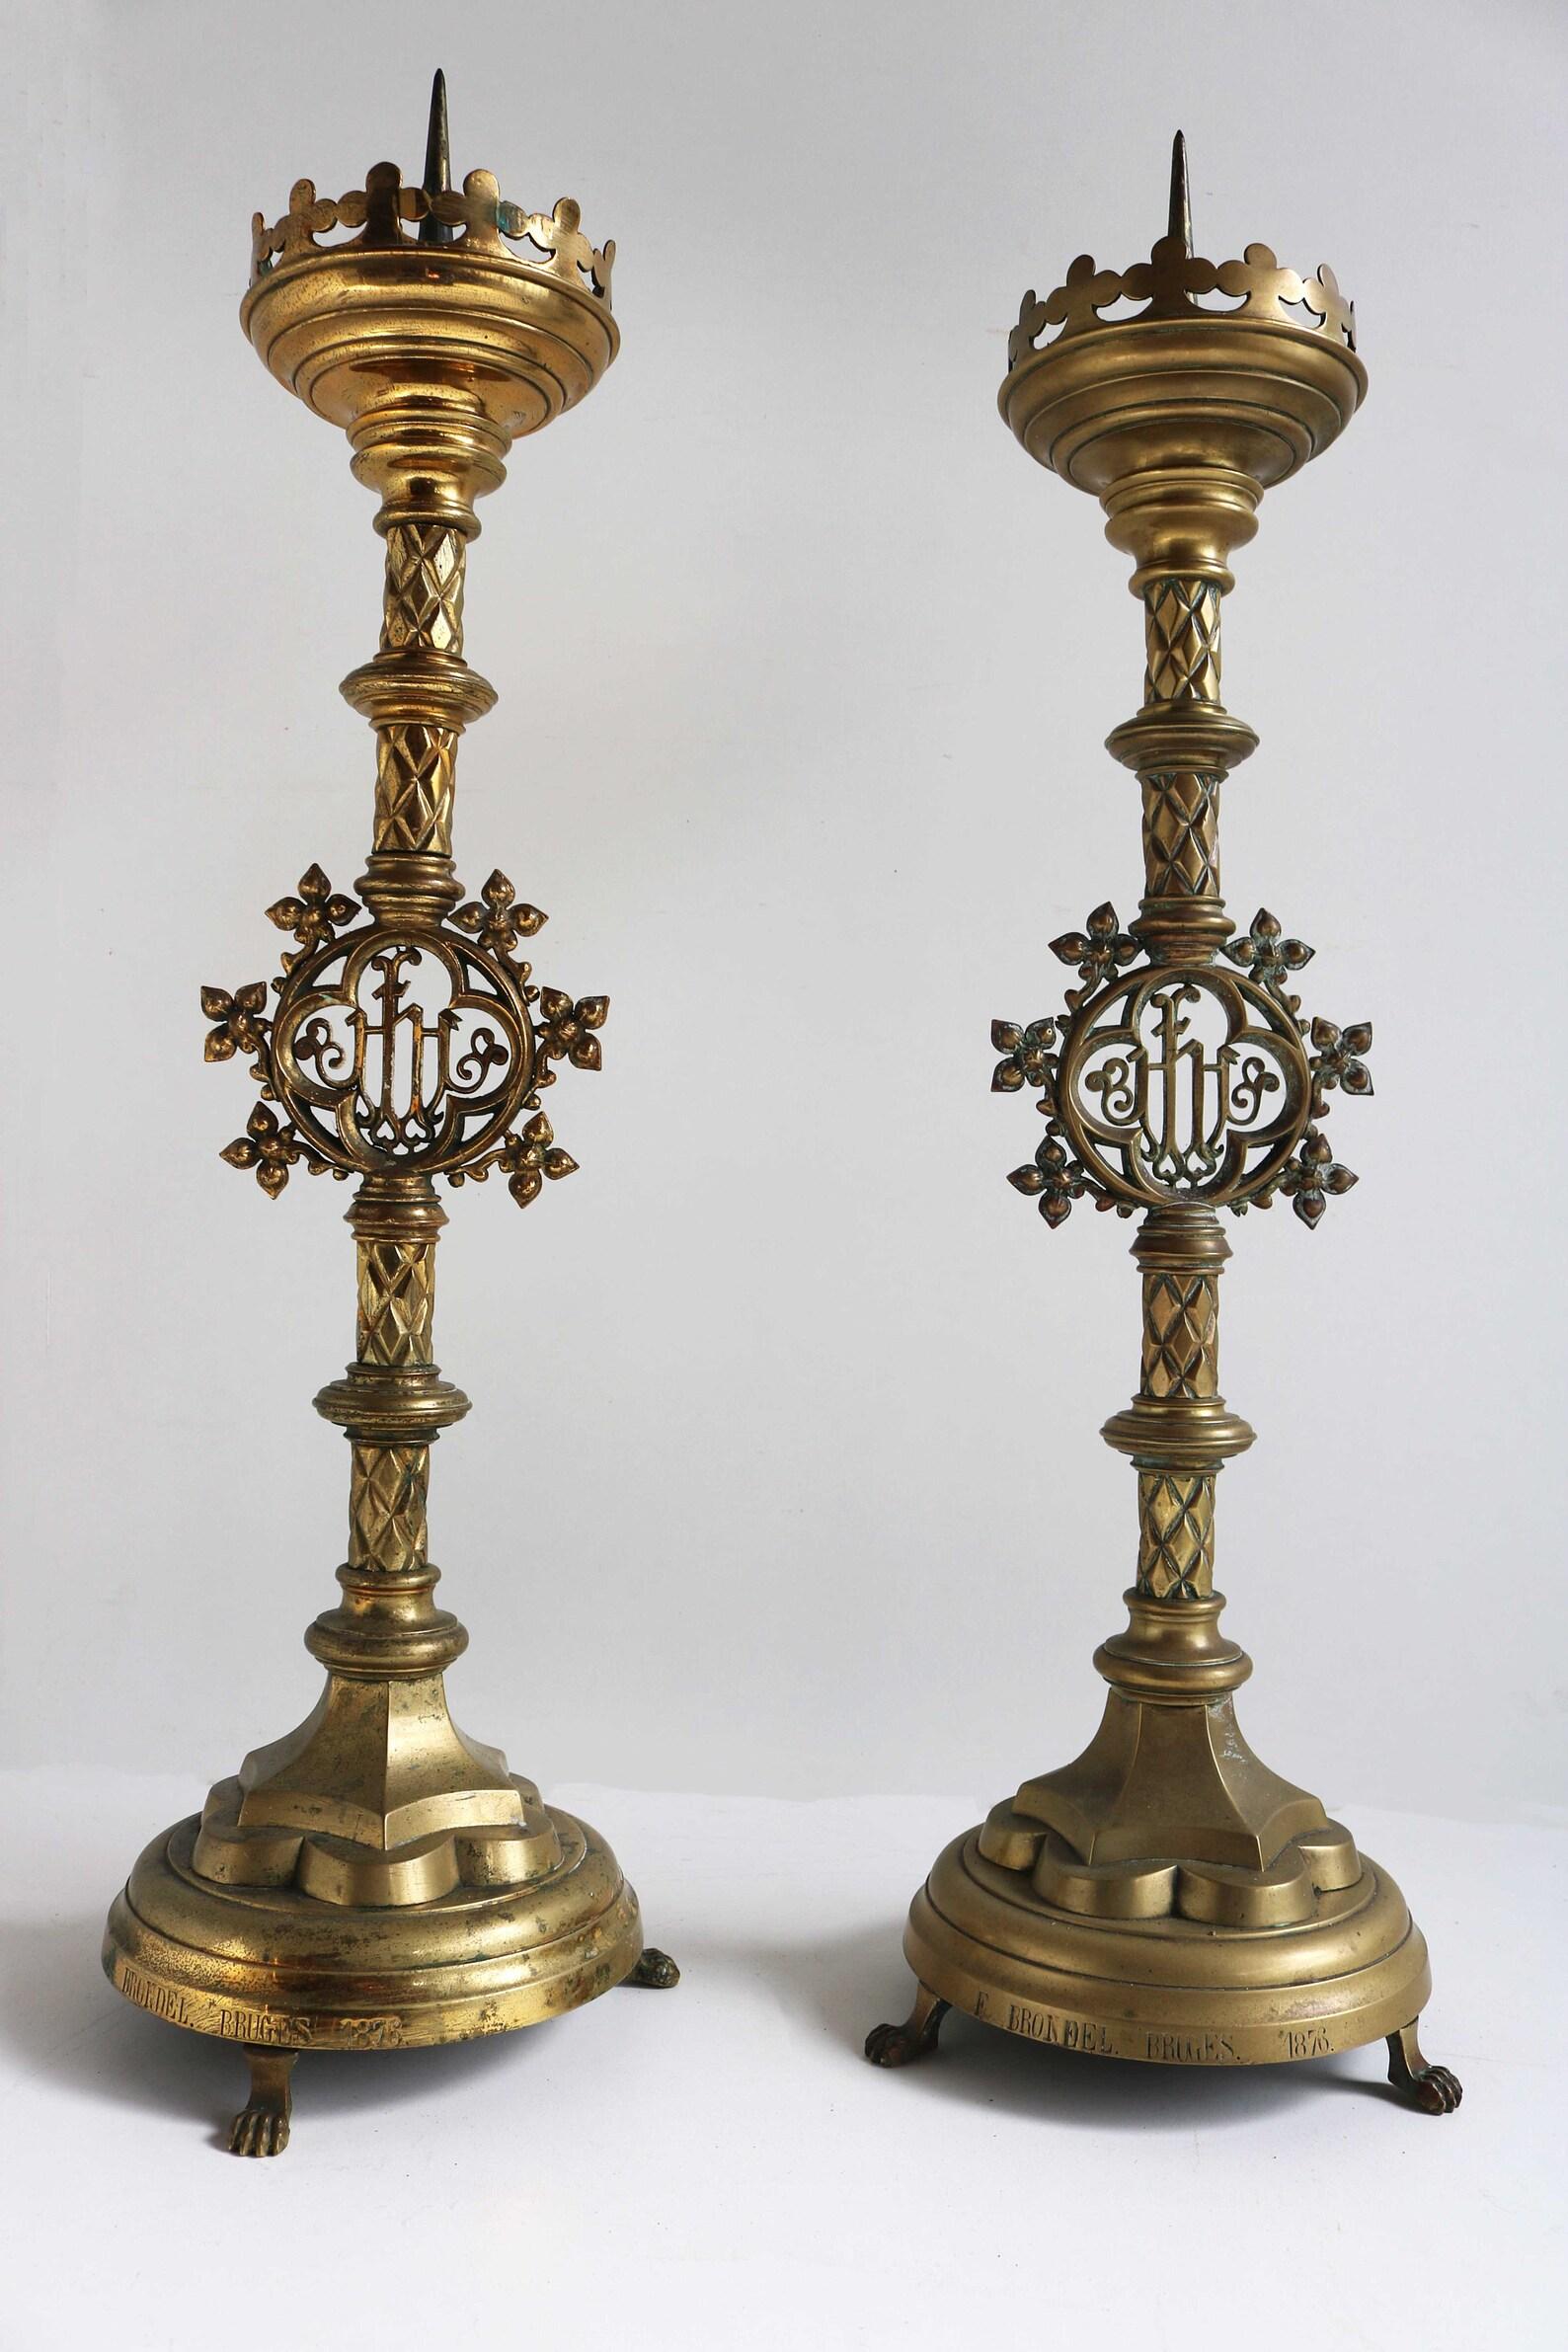 19th Century Pair of Antique Brass Candlesticks 1876 Church Altar Religious Candleholders